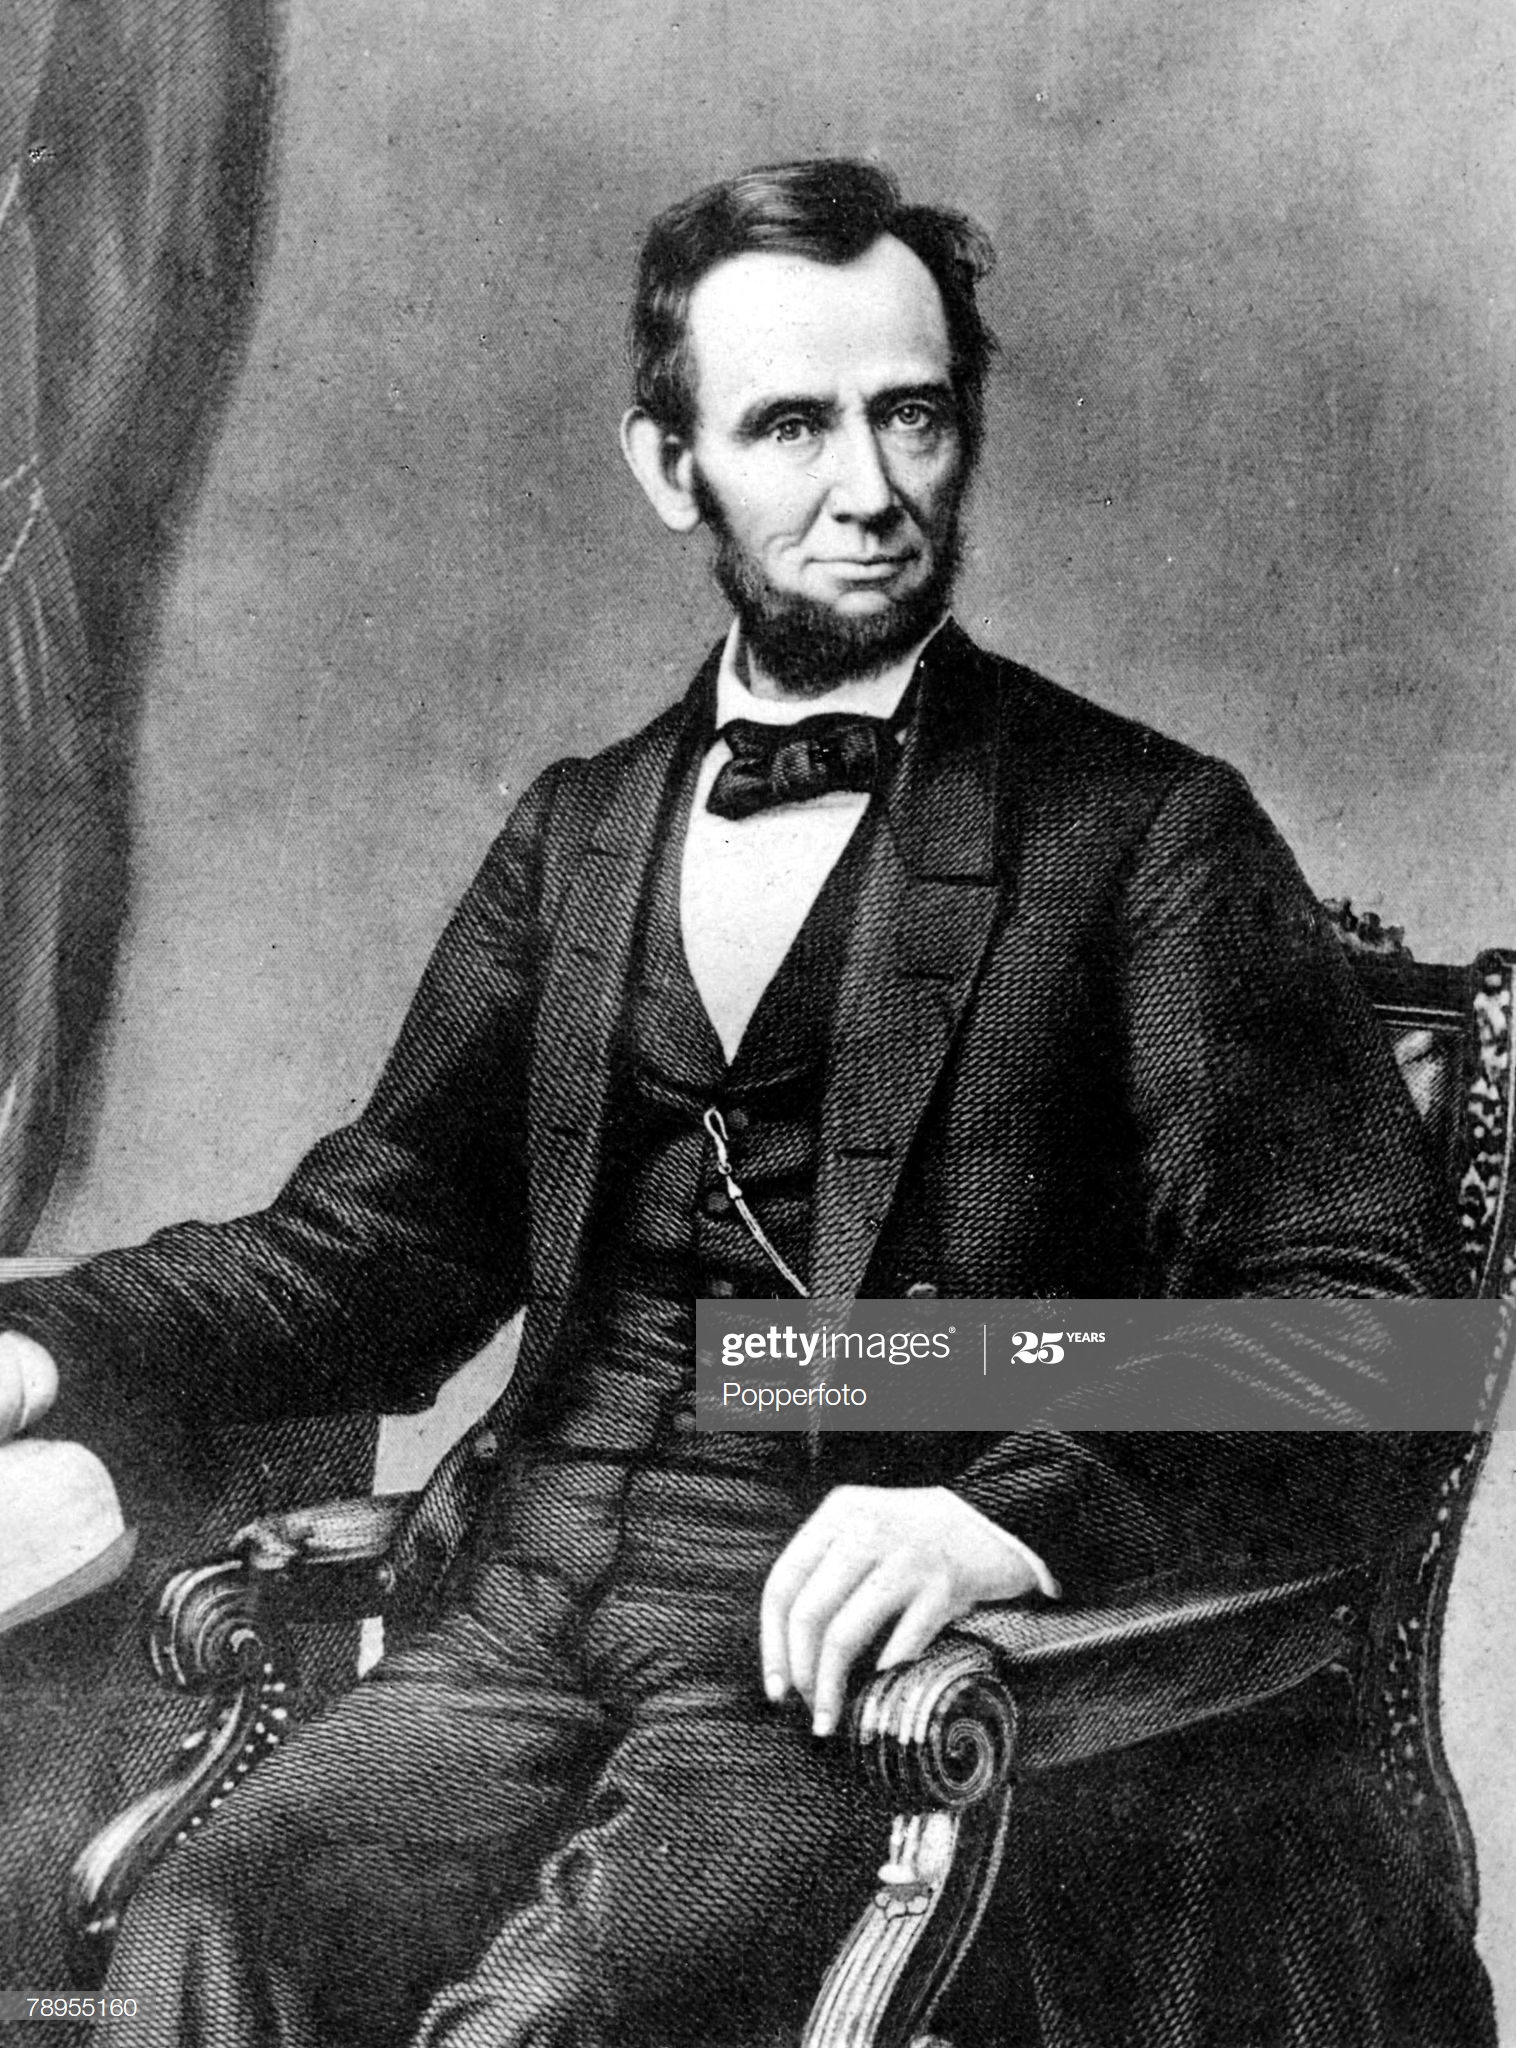 Formal portrait of Abraham Lincoln 1809 - 1865, 16th President of the United States of America, famous for saving the Union in the American Civil and the emancipation of slaves. He was assassinated by John Wilkes Booth in 1865. : News Photo